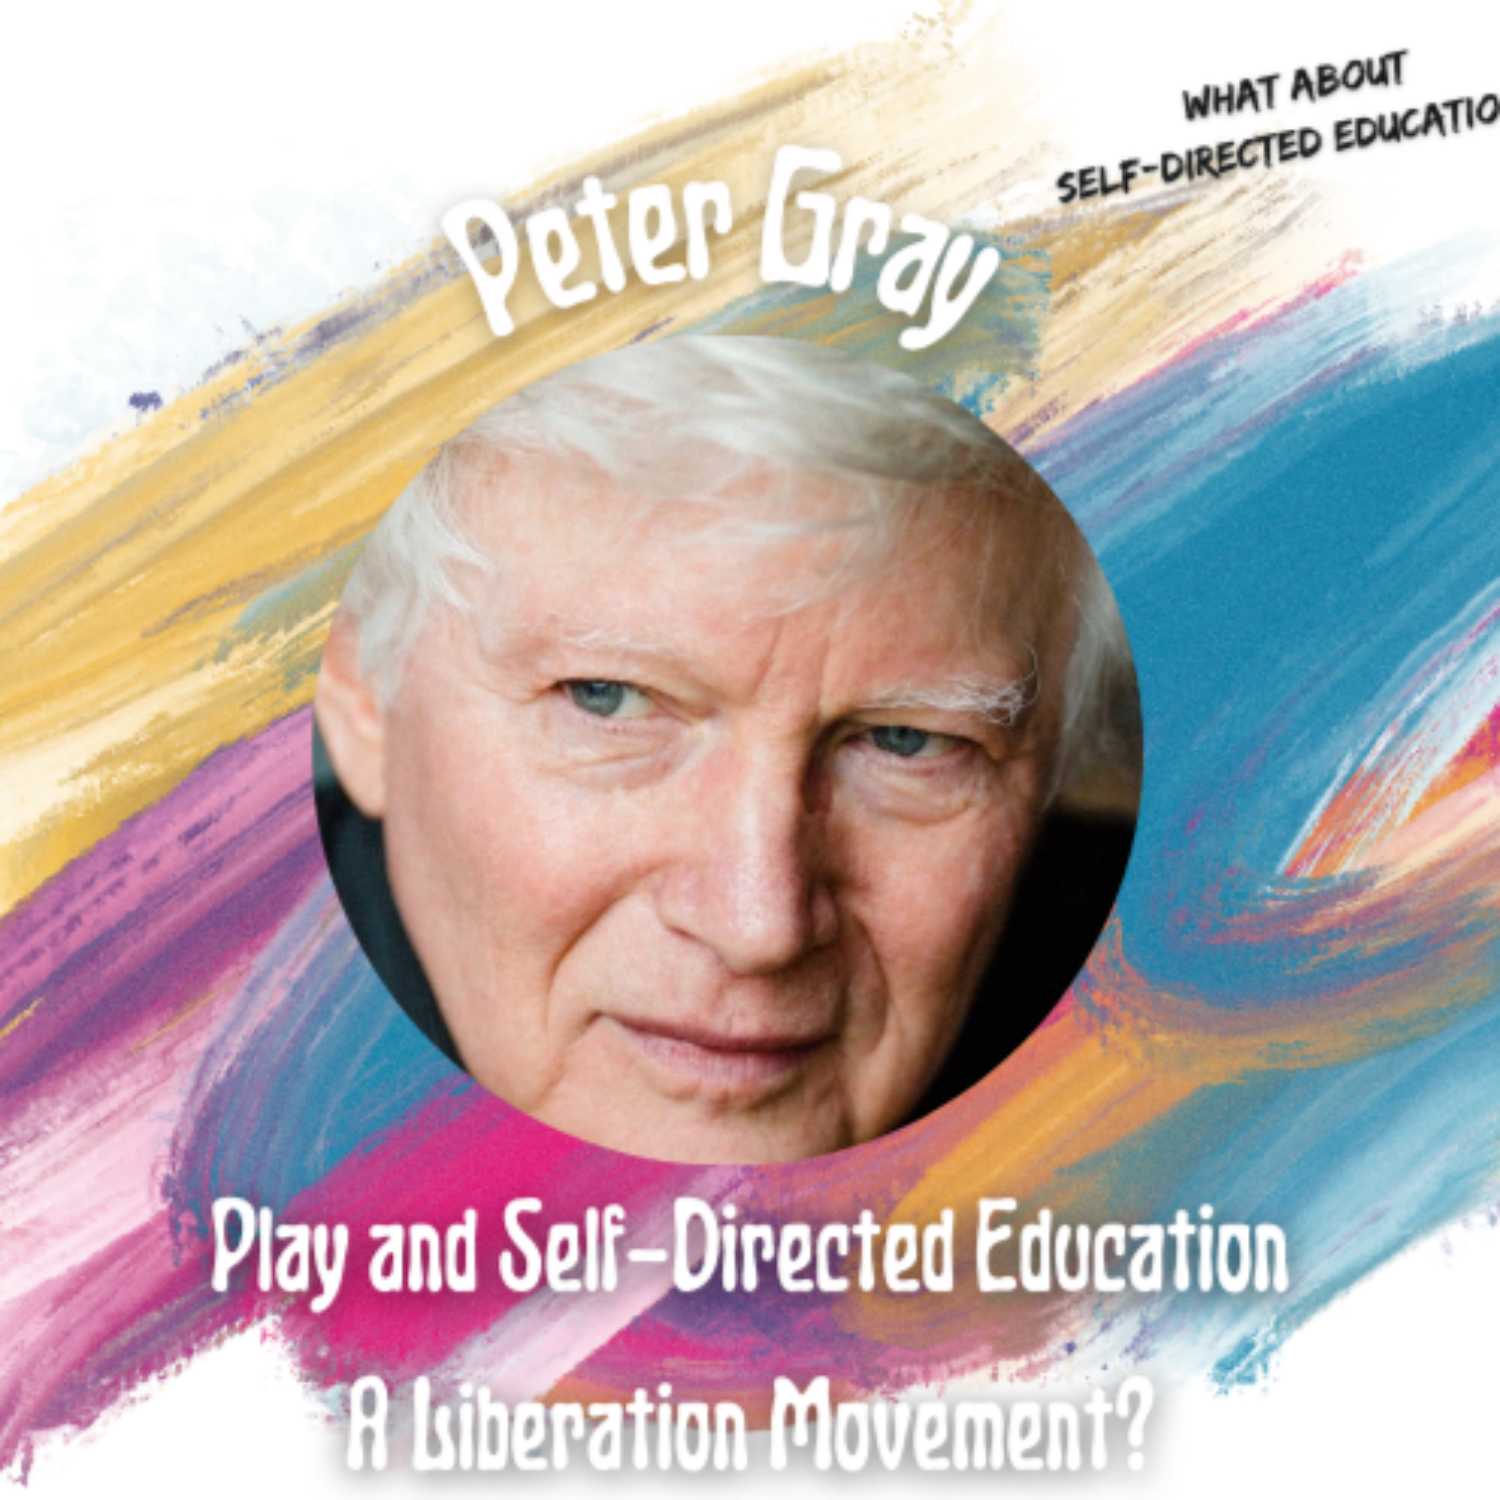 Play and Self-Directed Education - Interview with Peter Gray